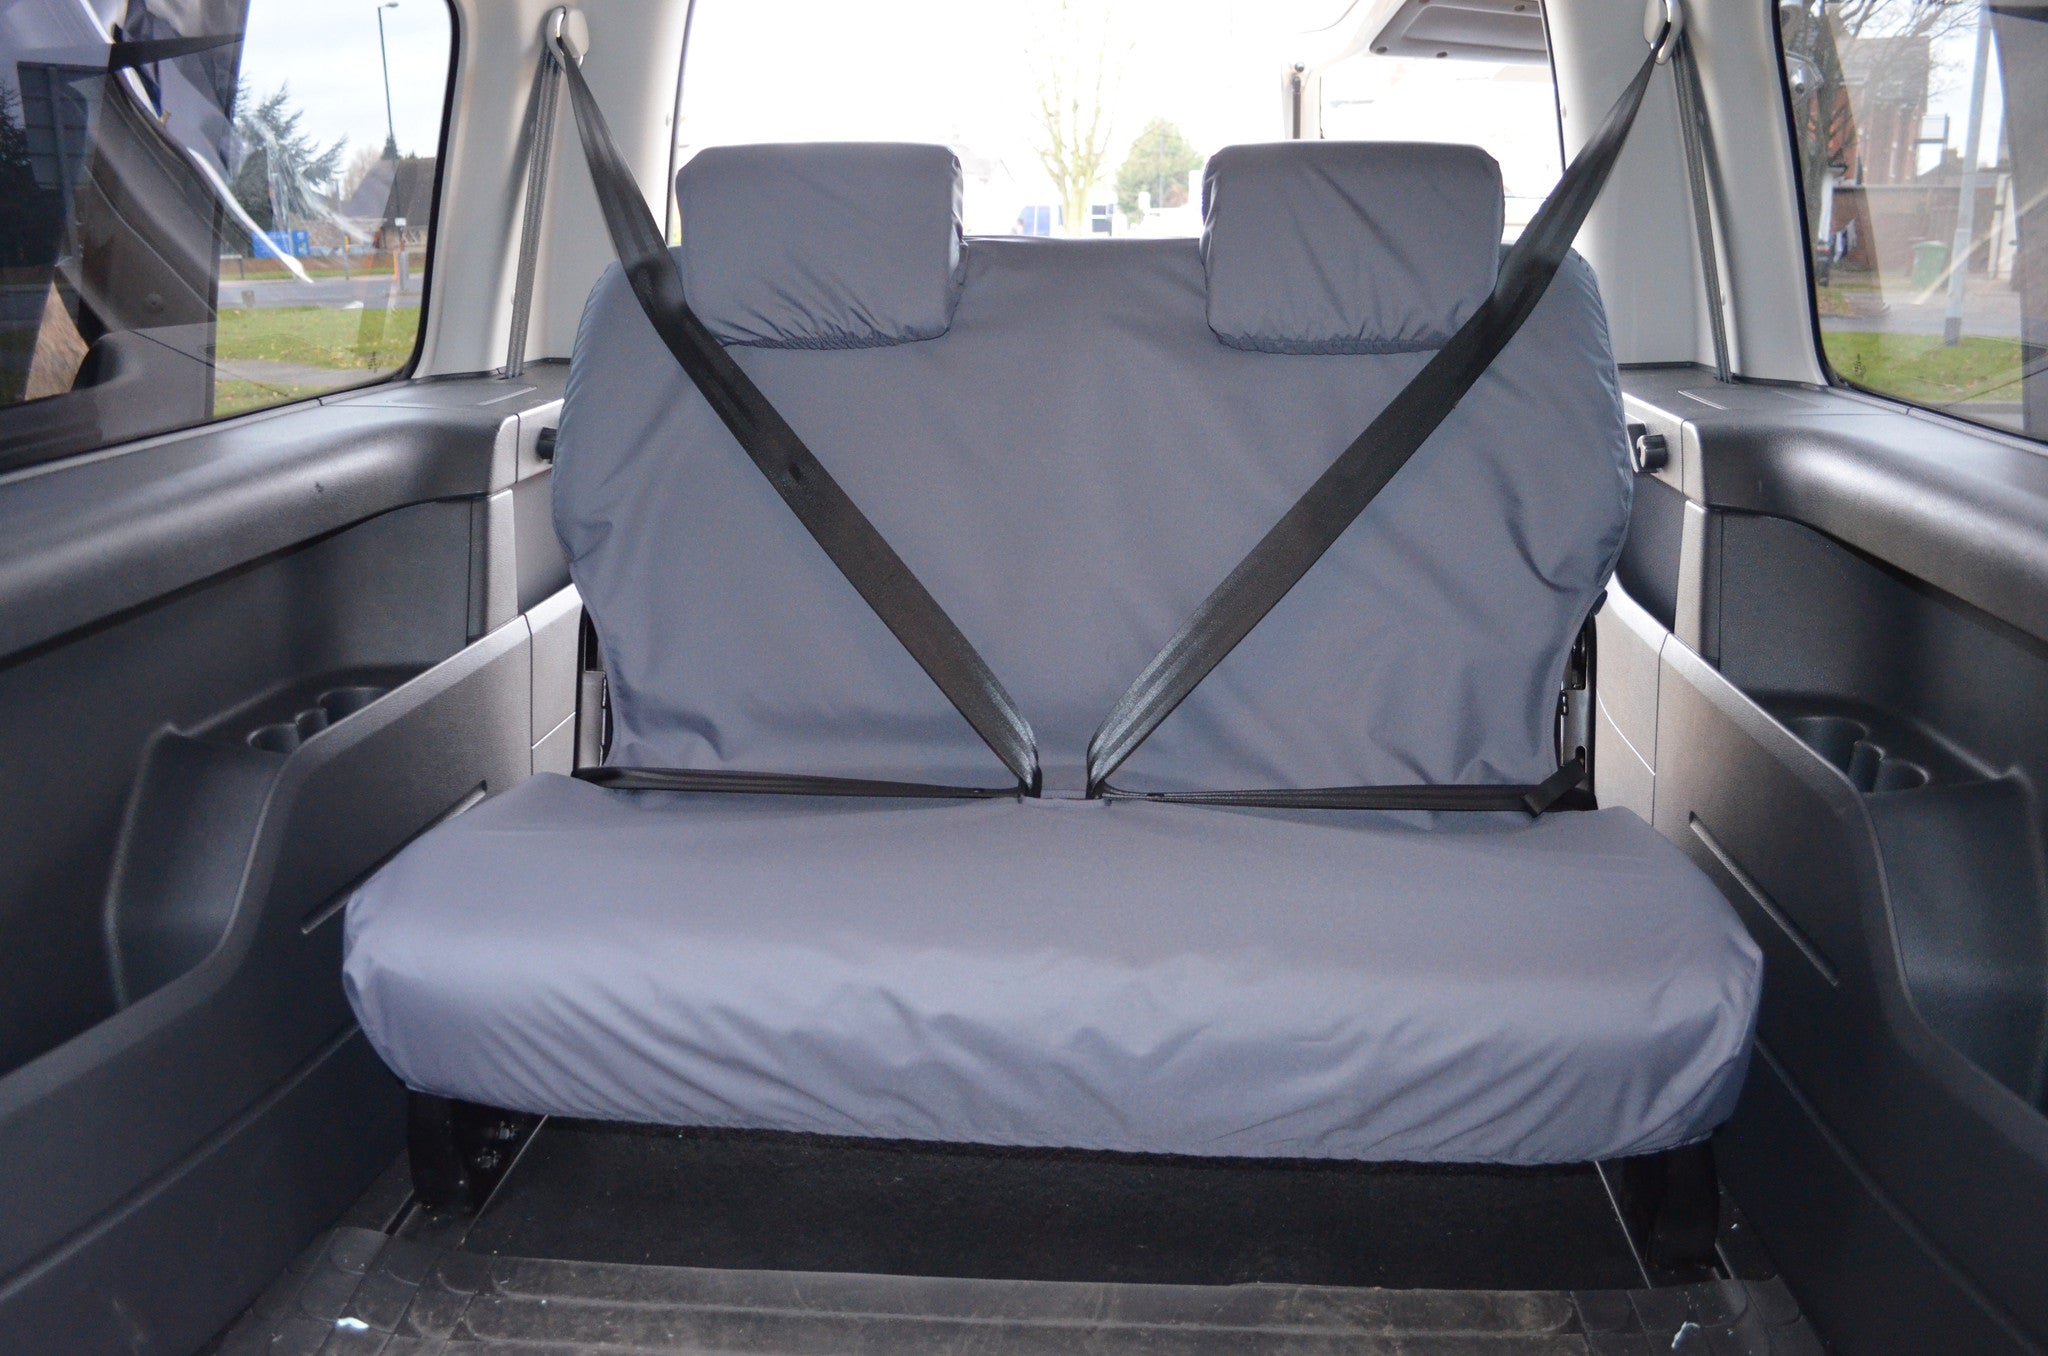 Volkswagen Caddy 2004 Onwards Seat Covers 3rd Row Double Seat / Grey Turtle Covers Ltd